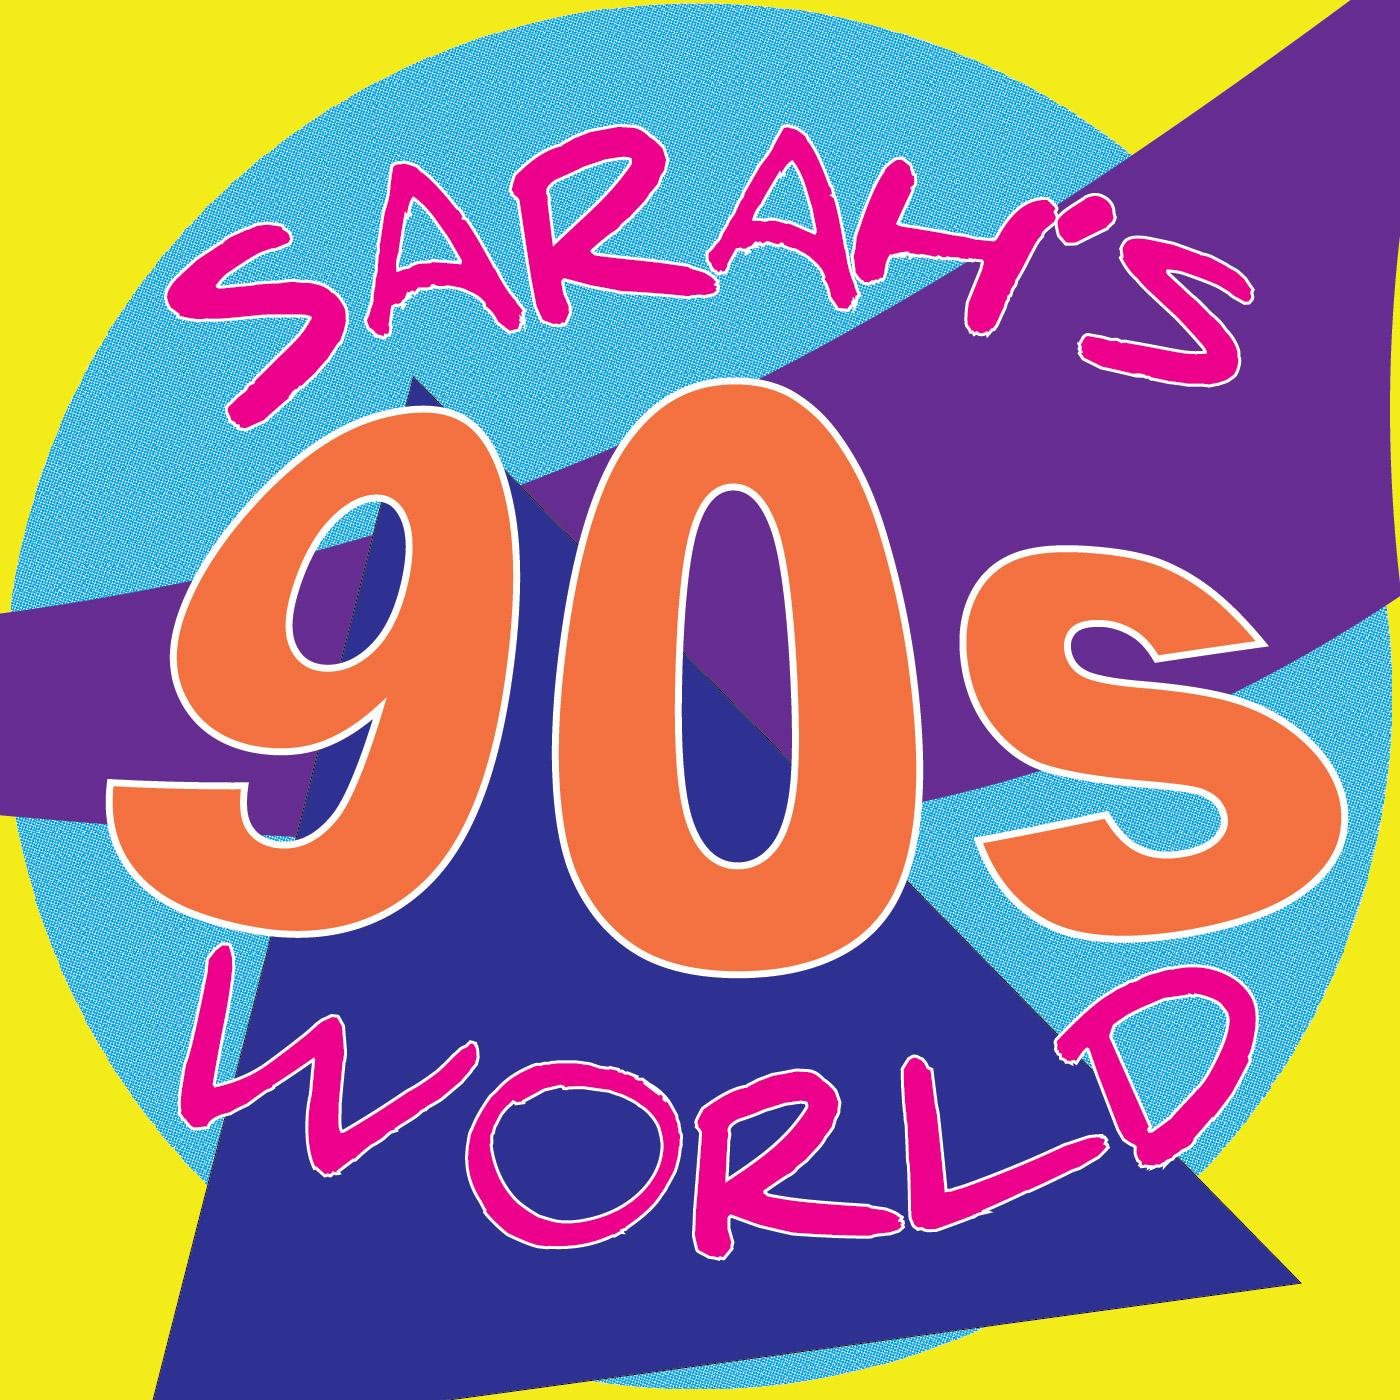 Hi!!!! My name is Sarah and welcome to my 90s world! Every week on Youtube I will be bringing the 90s back to Friday with lots of fun topics! TGIF!